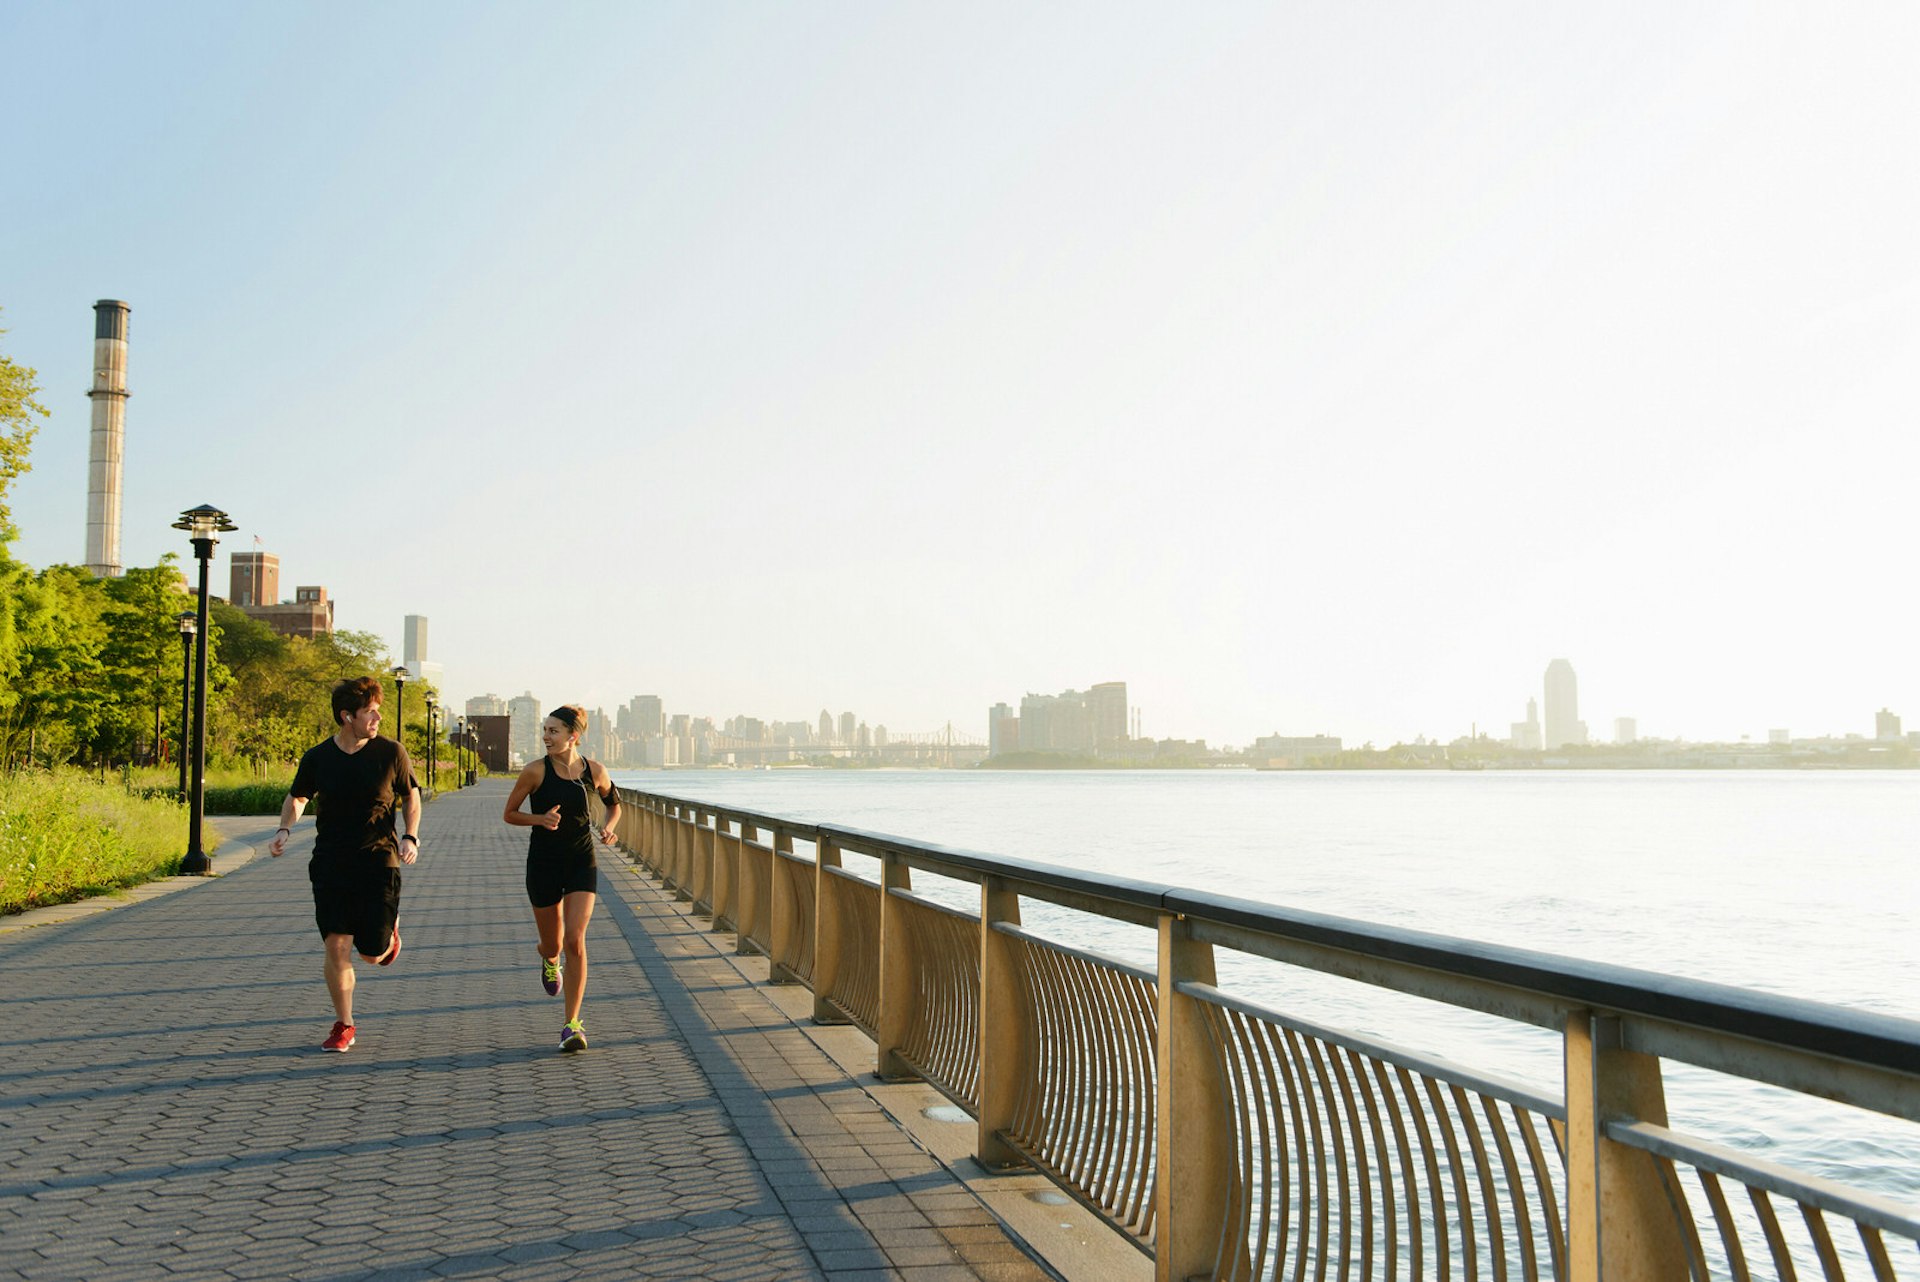 Two runners run along the footpath next to the Hudson River in New York City at twilight